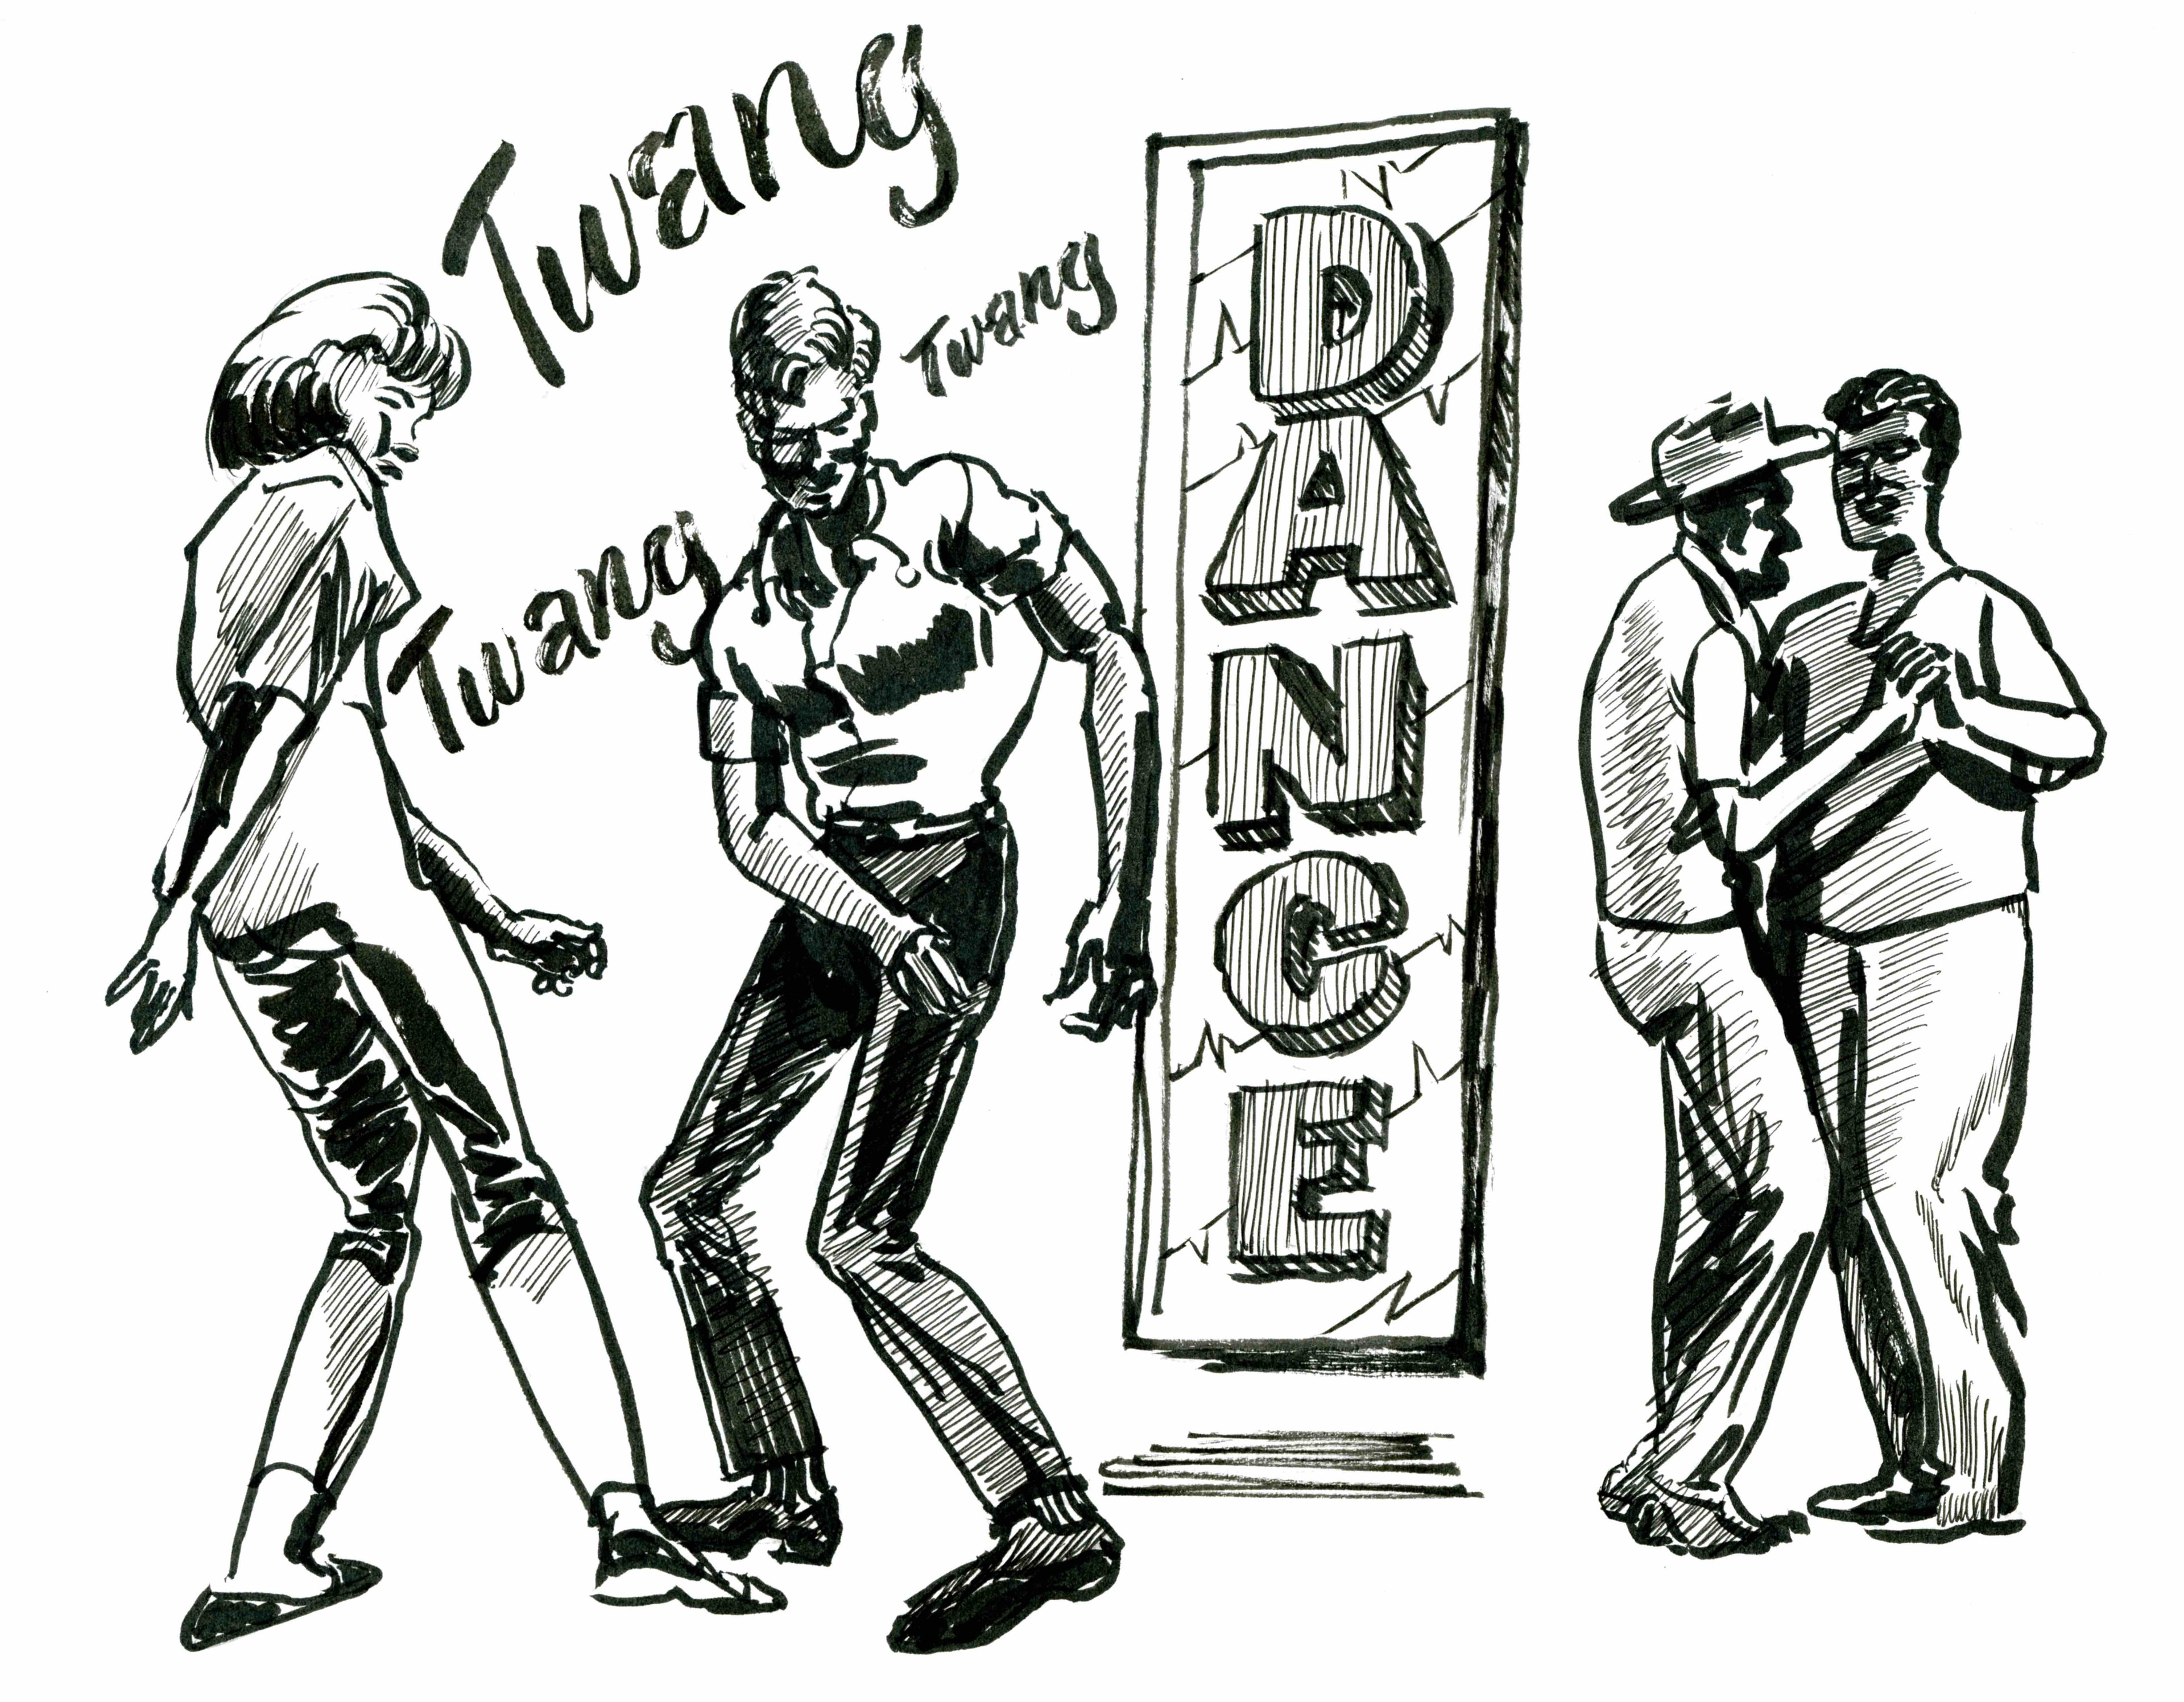 Use photographic reference. I used photos as models to draw popular dance moves from the 60's